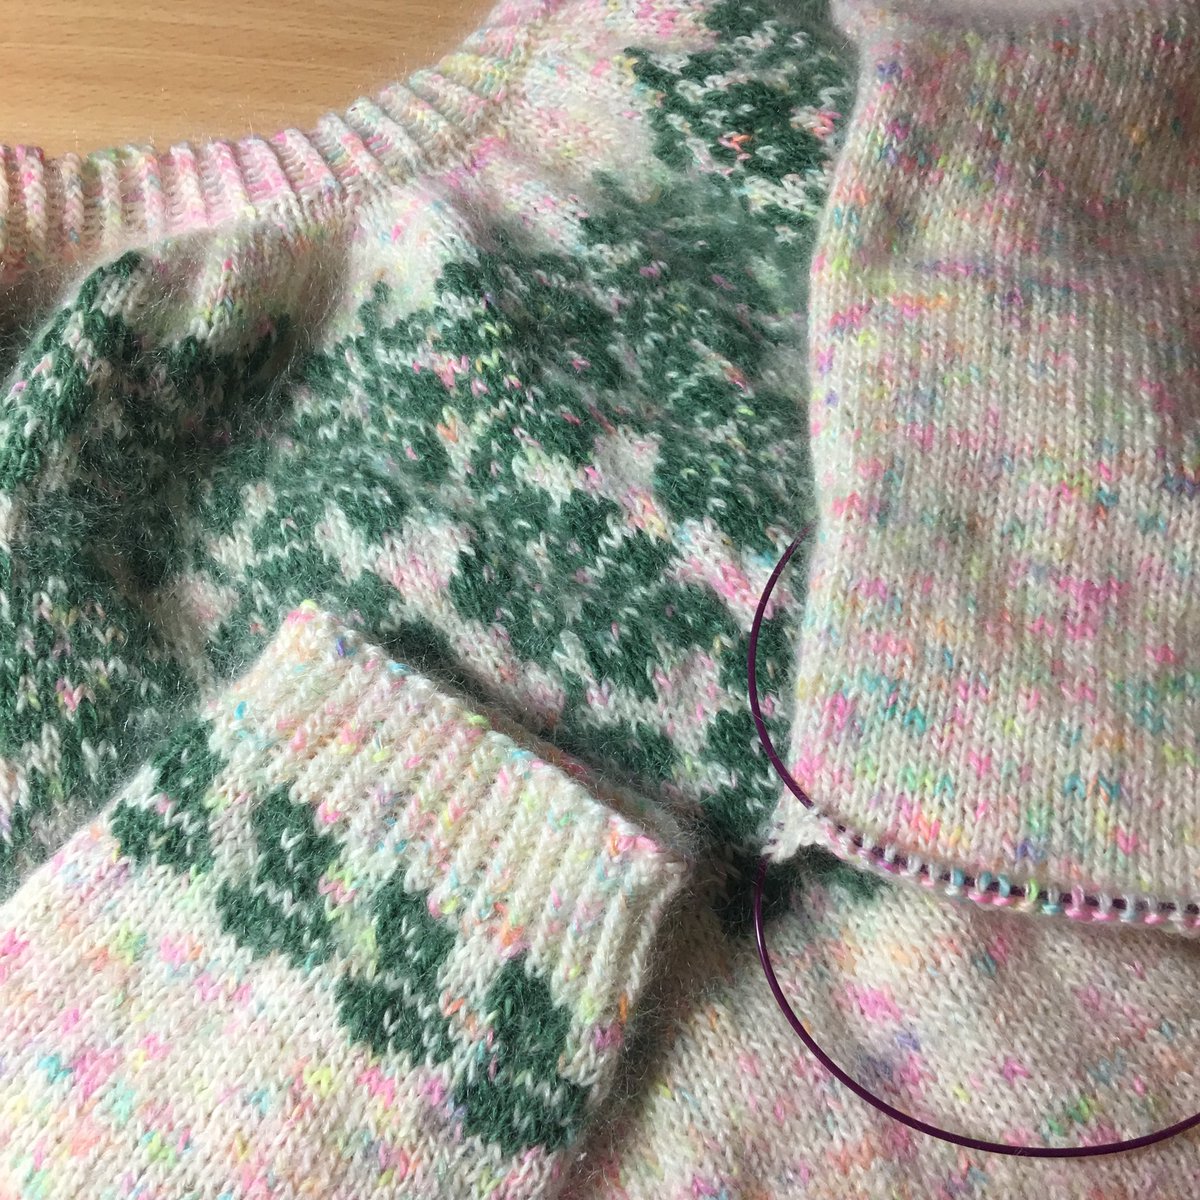 Working on my #LehtoSweater this afternoon & managing to resist the lure of my advent project…not much further to go though!

What’s on your needles, #KnittingTwitter?

#InclusiveYarnCommunity #OffRav #KnittingWIP #SweaterKnitting #KnittersGonnaKnit